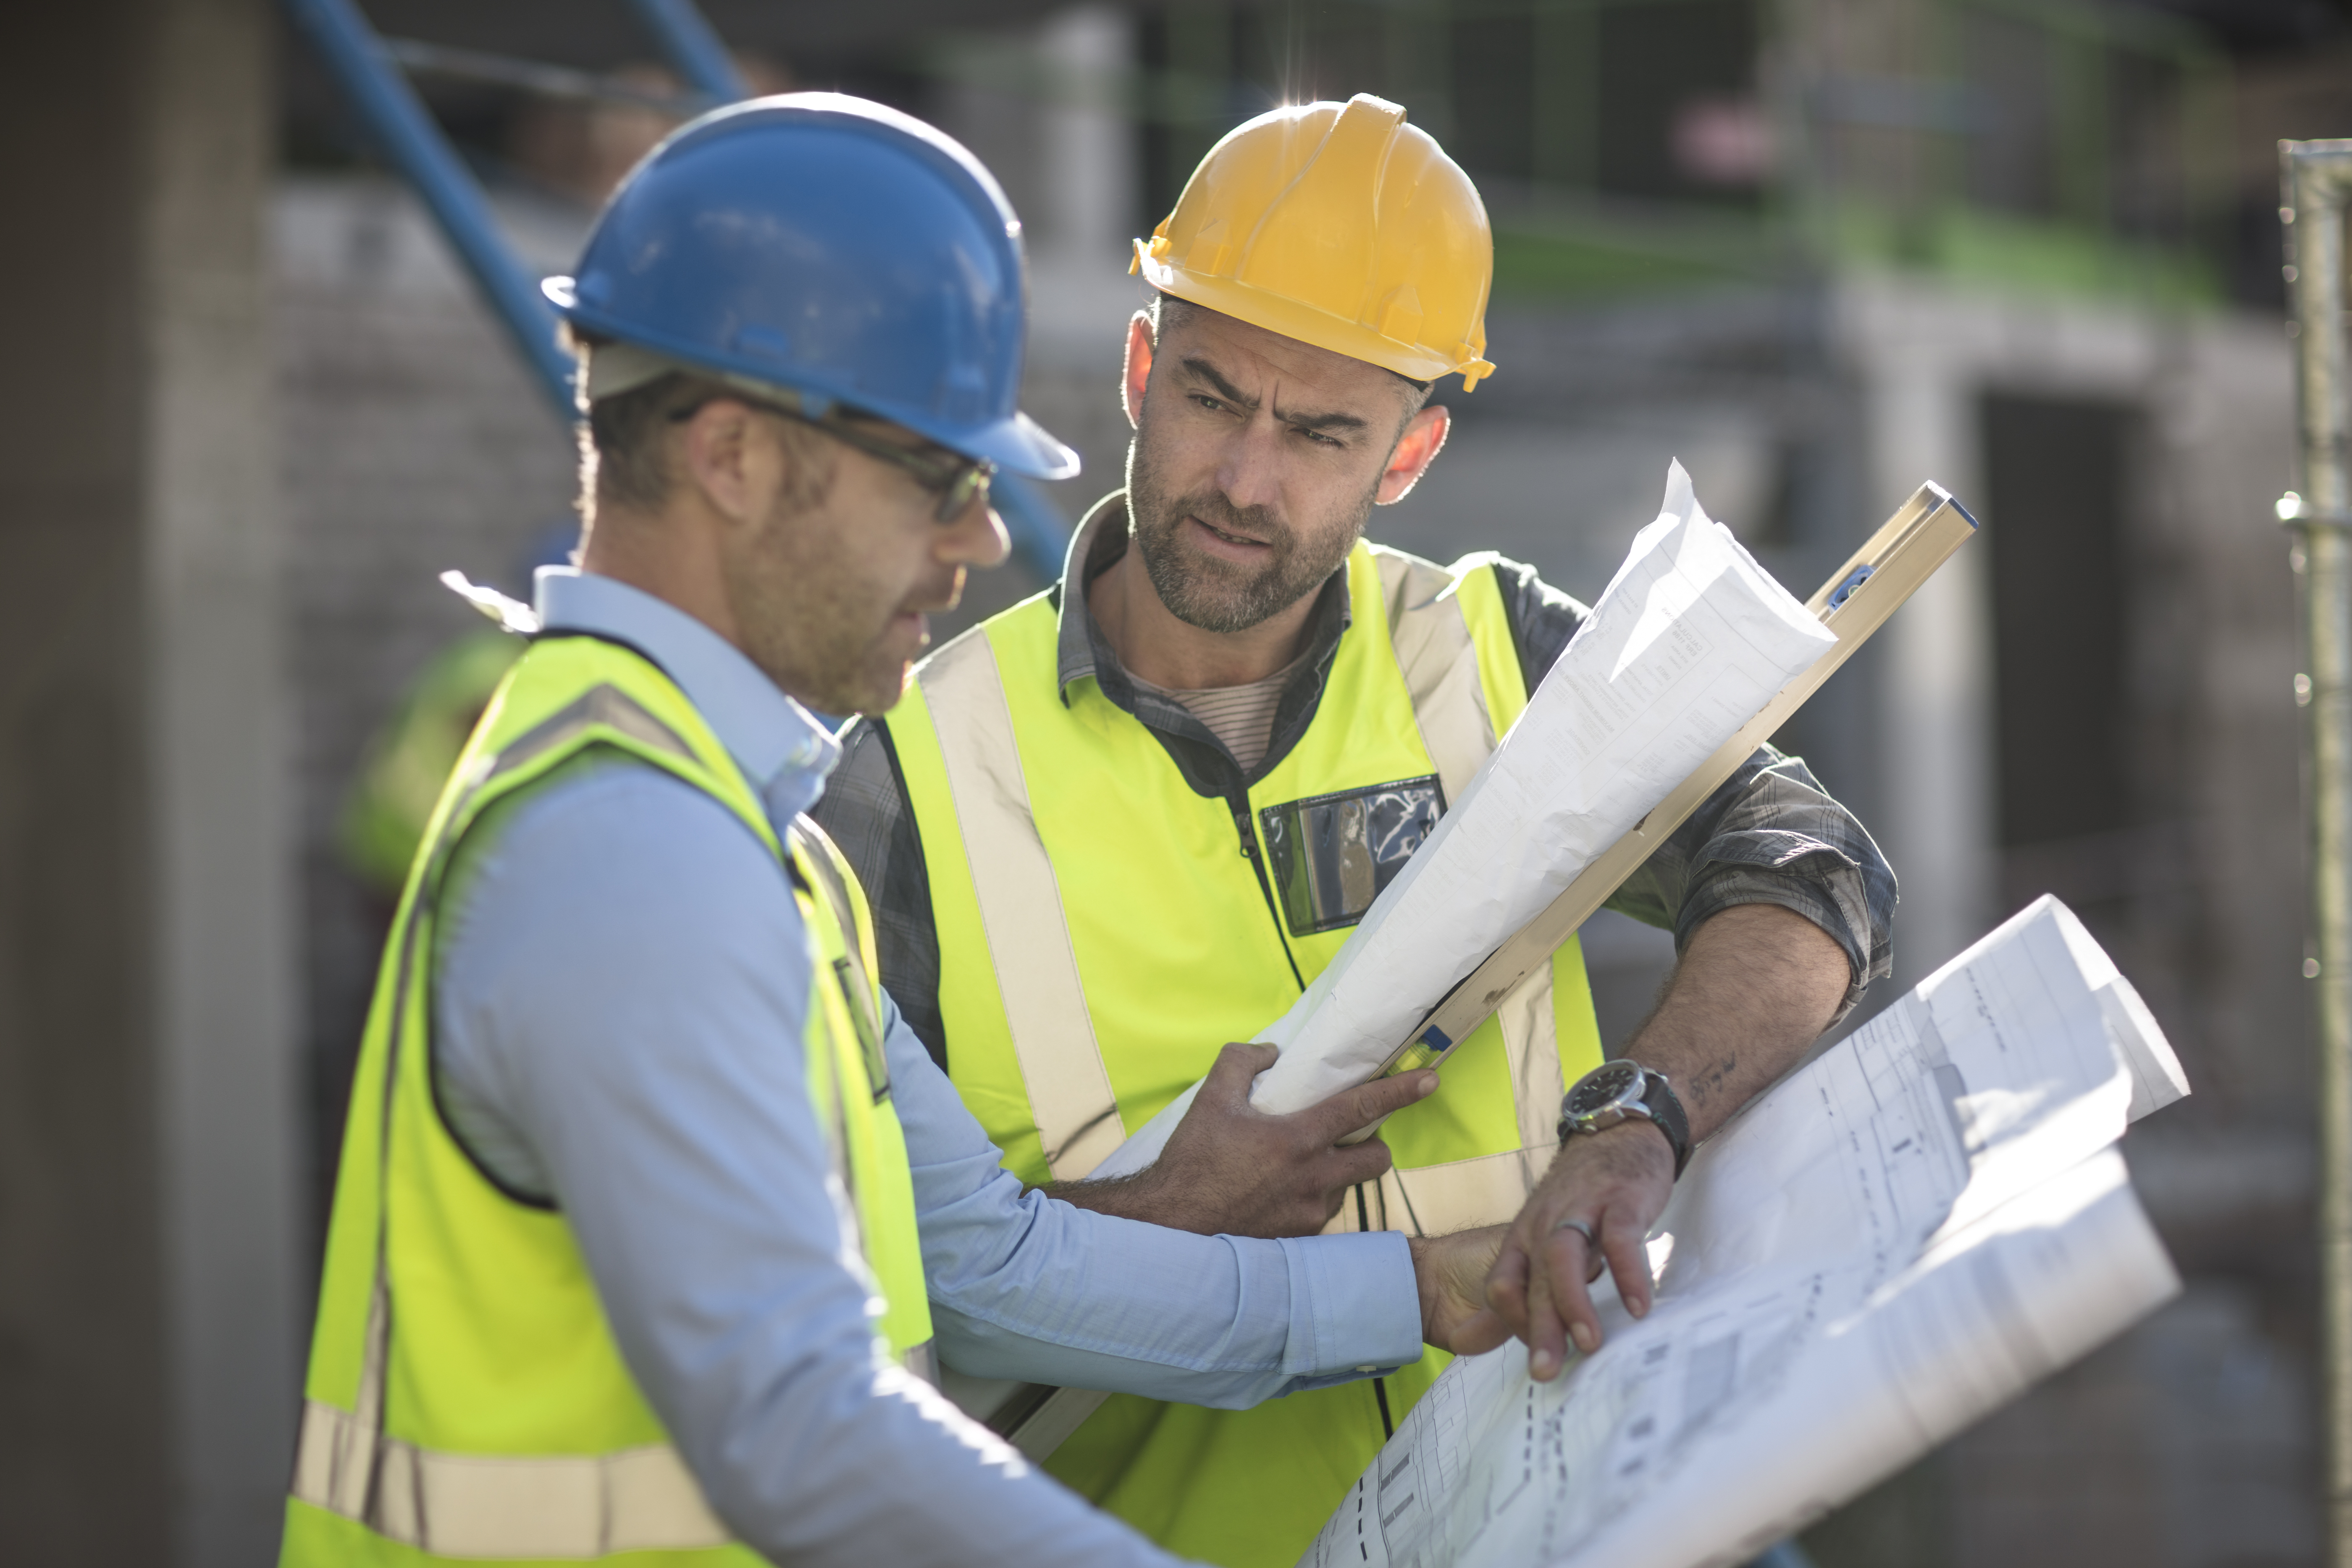 Hiring the Best Specialty Engineers for Your Commercial Real Estate Development